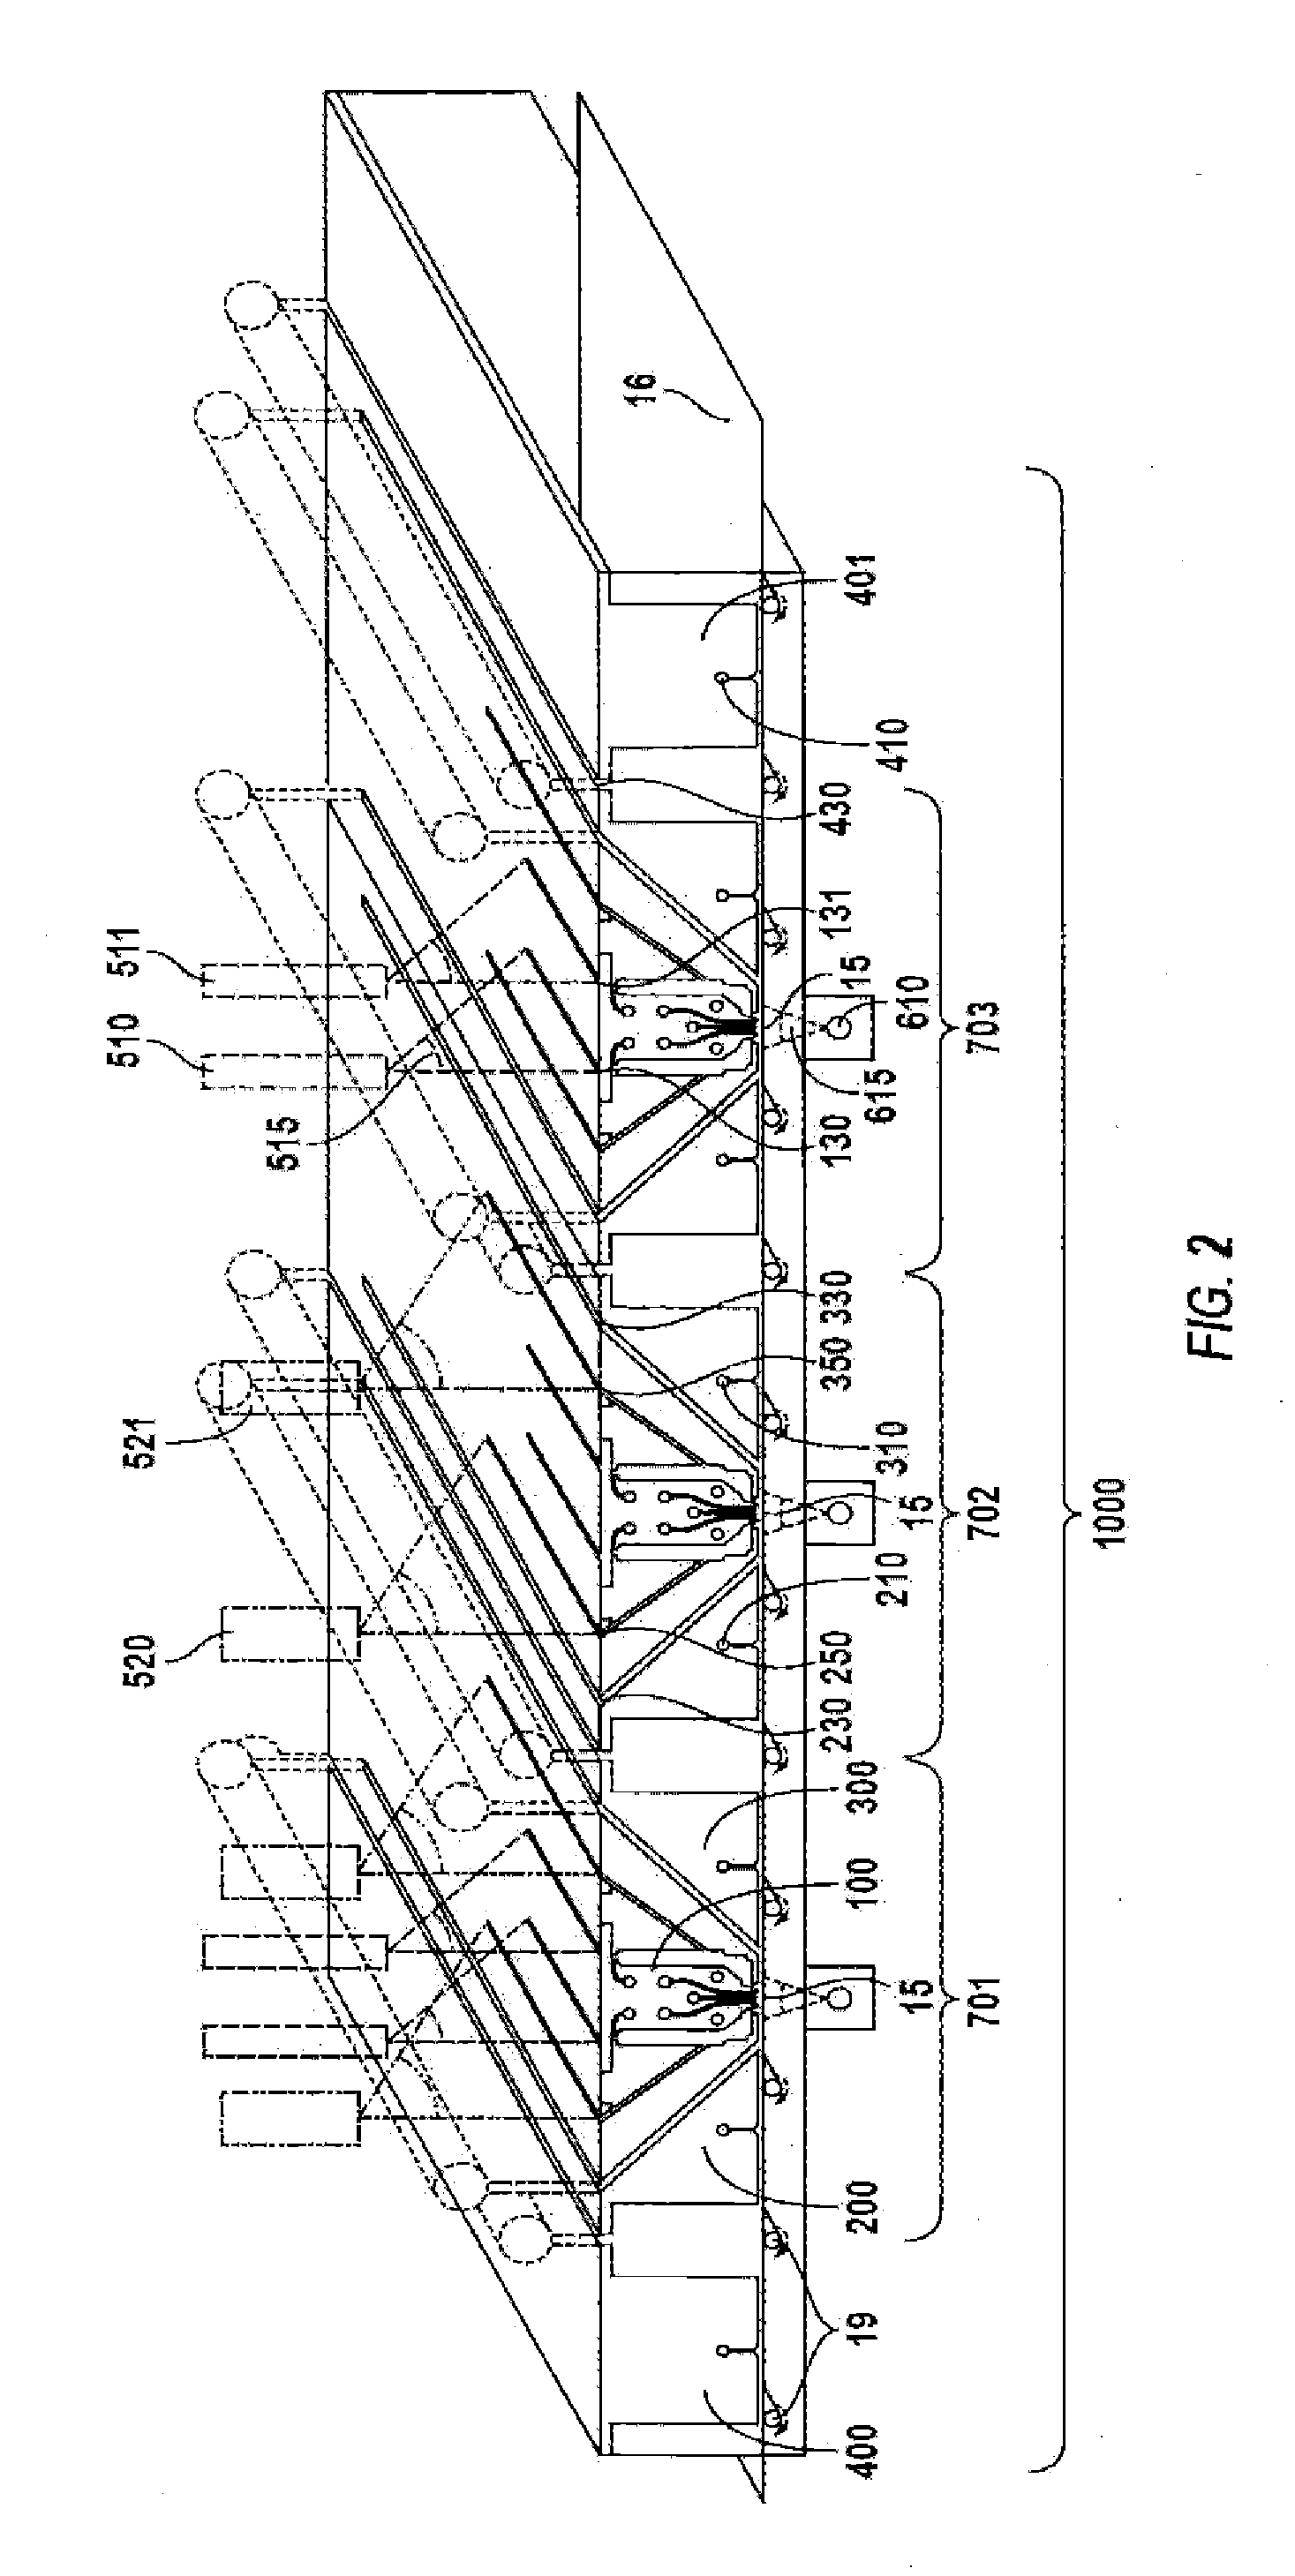 Method and apparatus for depositing a thin film